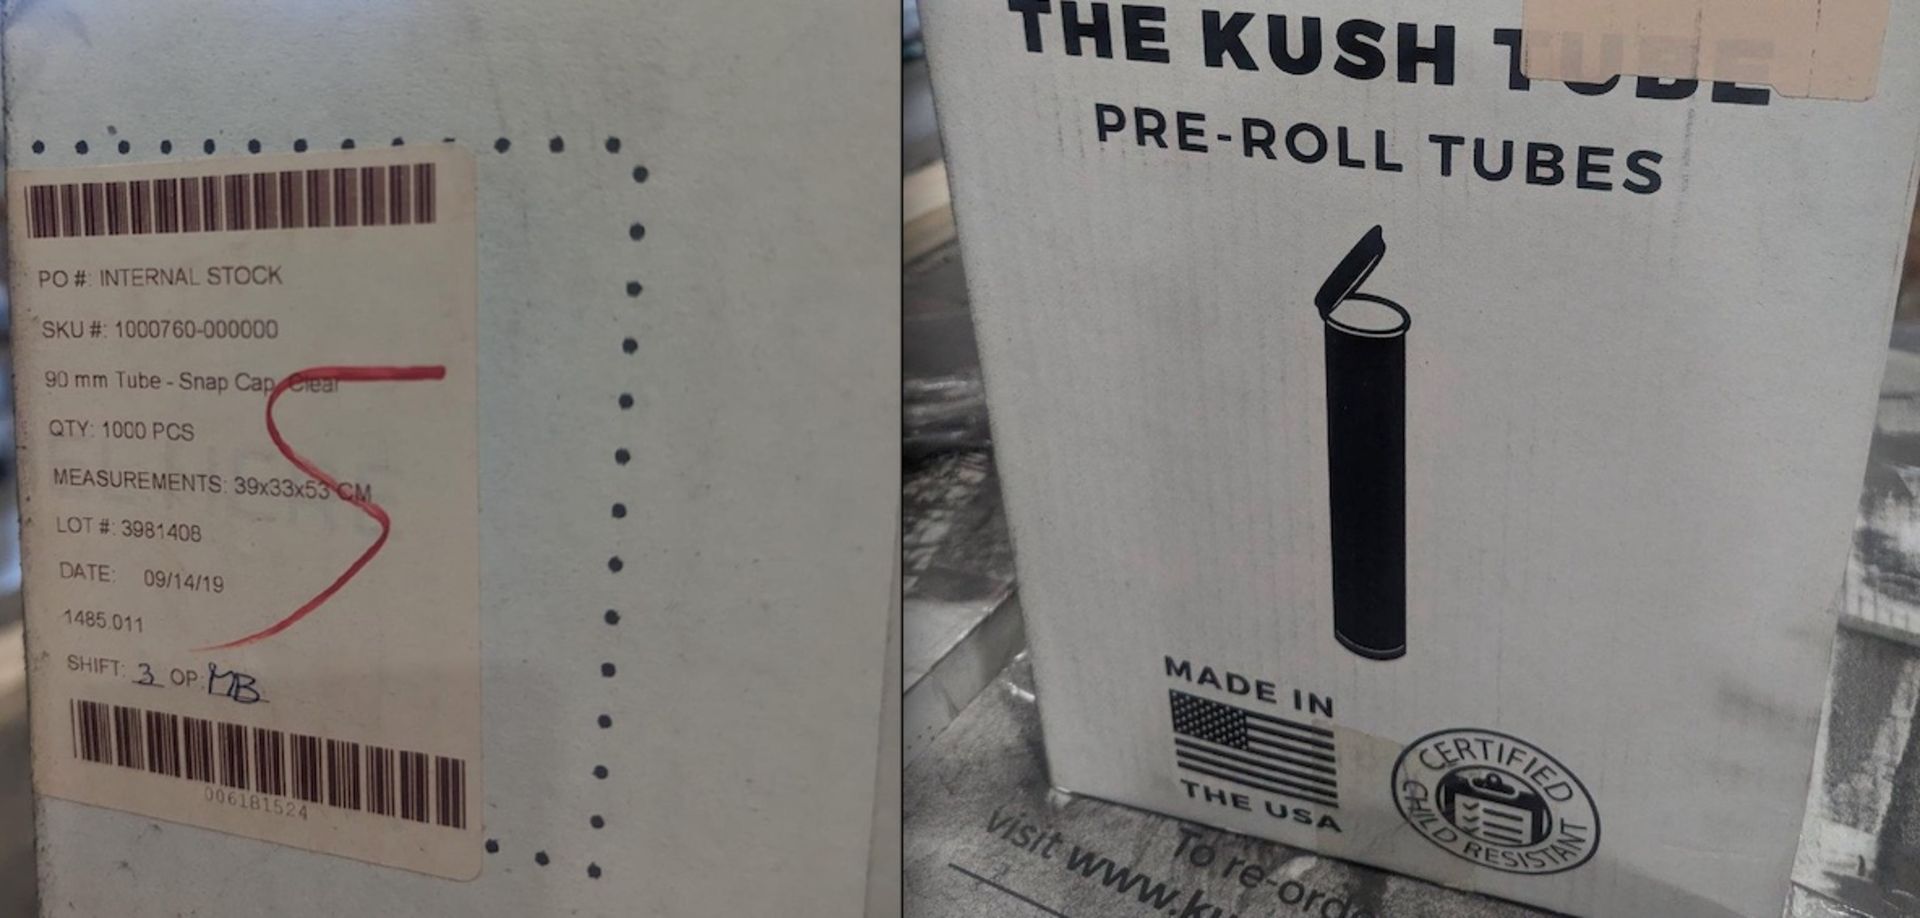 Lot of 26,000 Unused "The Kush Tube" 90 mm Snap Cap Joint Tubes. SKU 100760-000000. Color: Clear